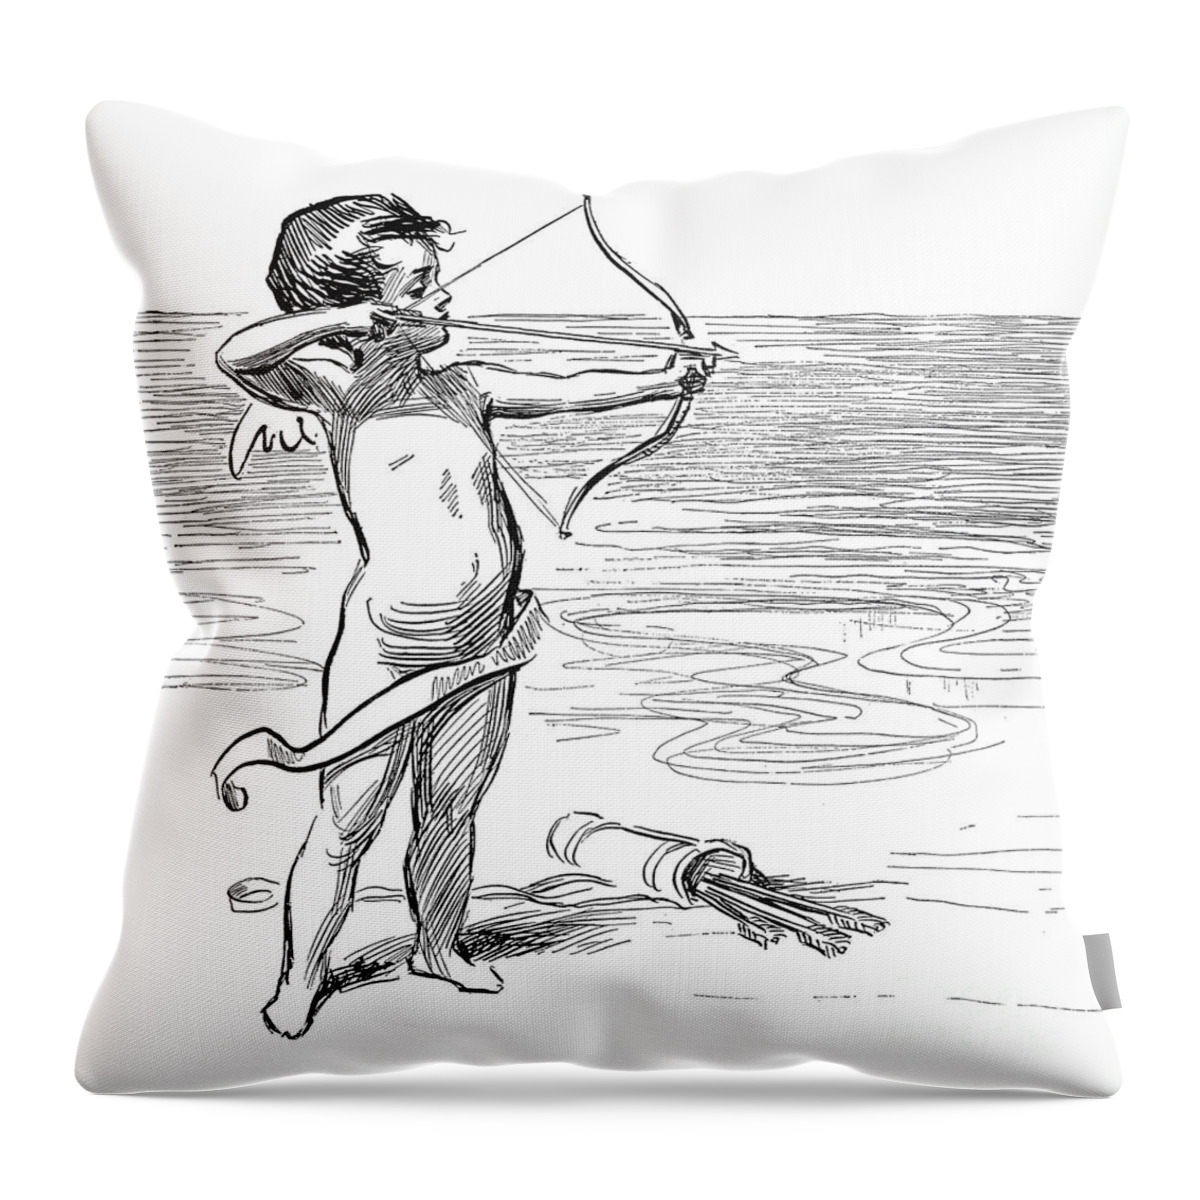 1900 Throw Pillow featuring the photograph Cupid, 1900 by Charles Dana Gibson